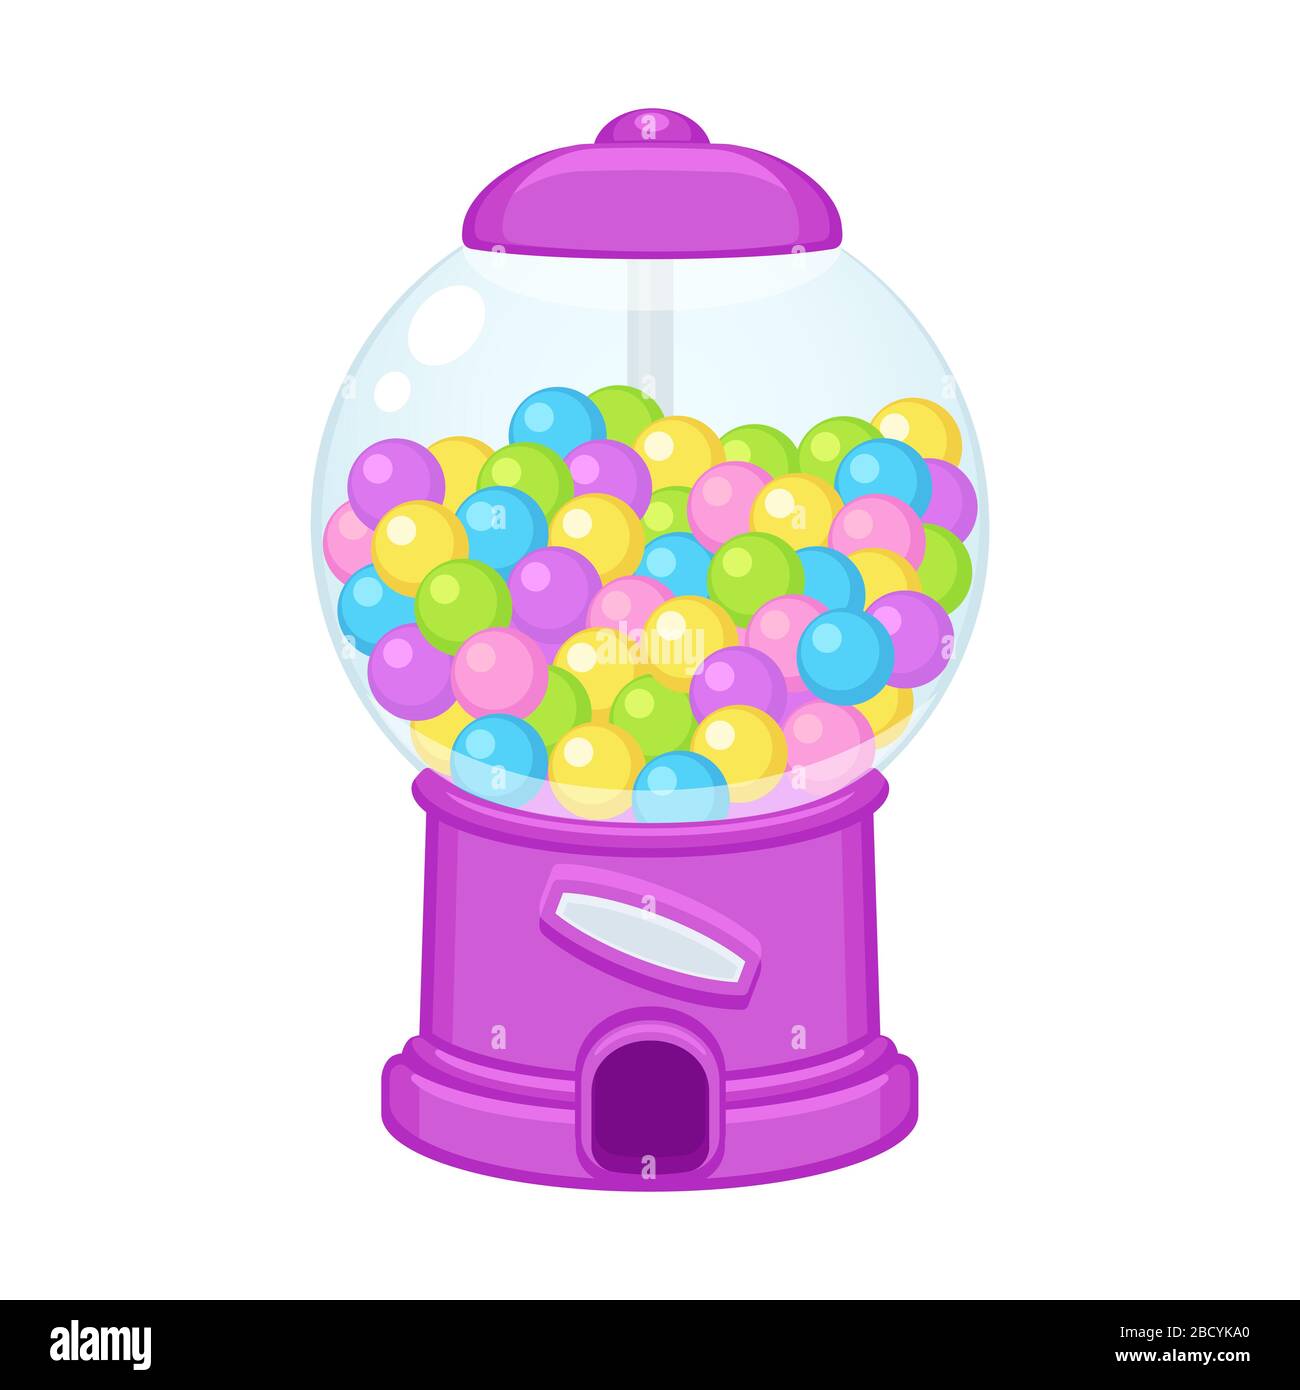 Old fashioned gumball machine. Cartoon candy or bubble gum dispenser, vector clip art illustration. Stock Vector